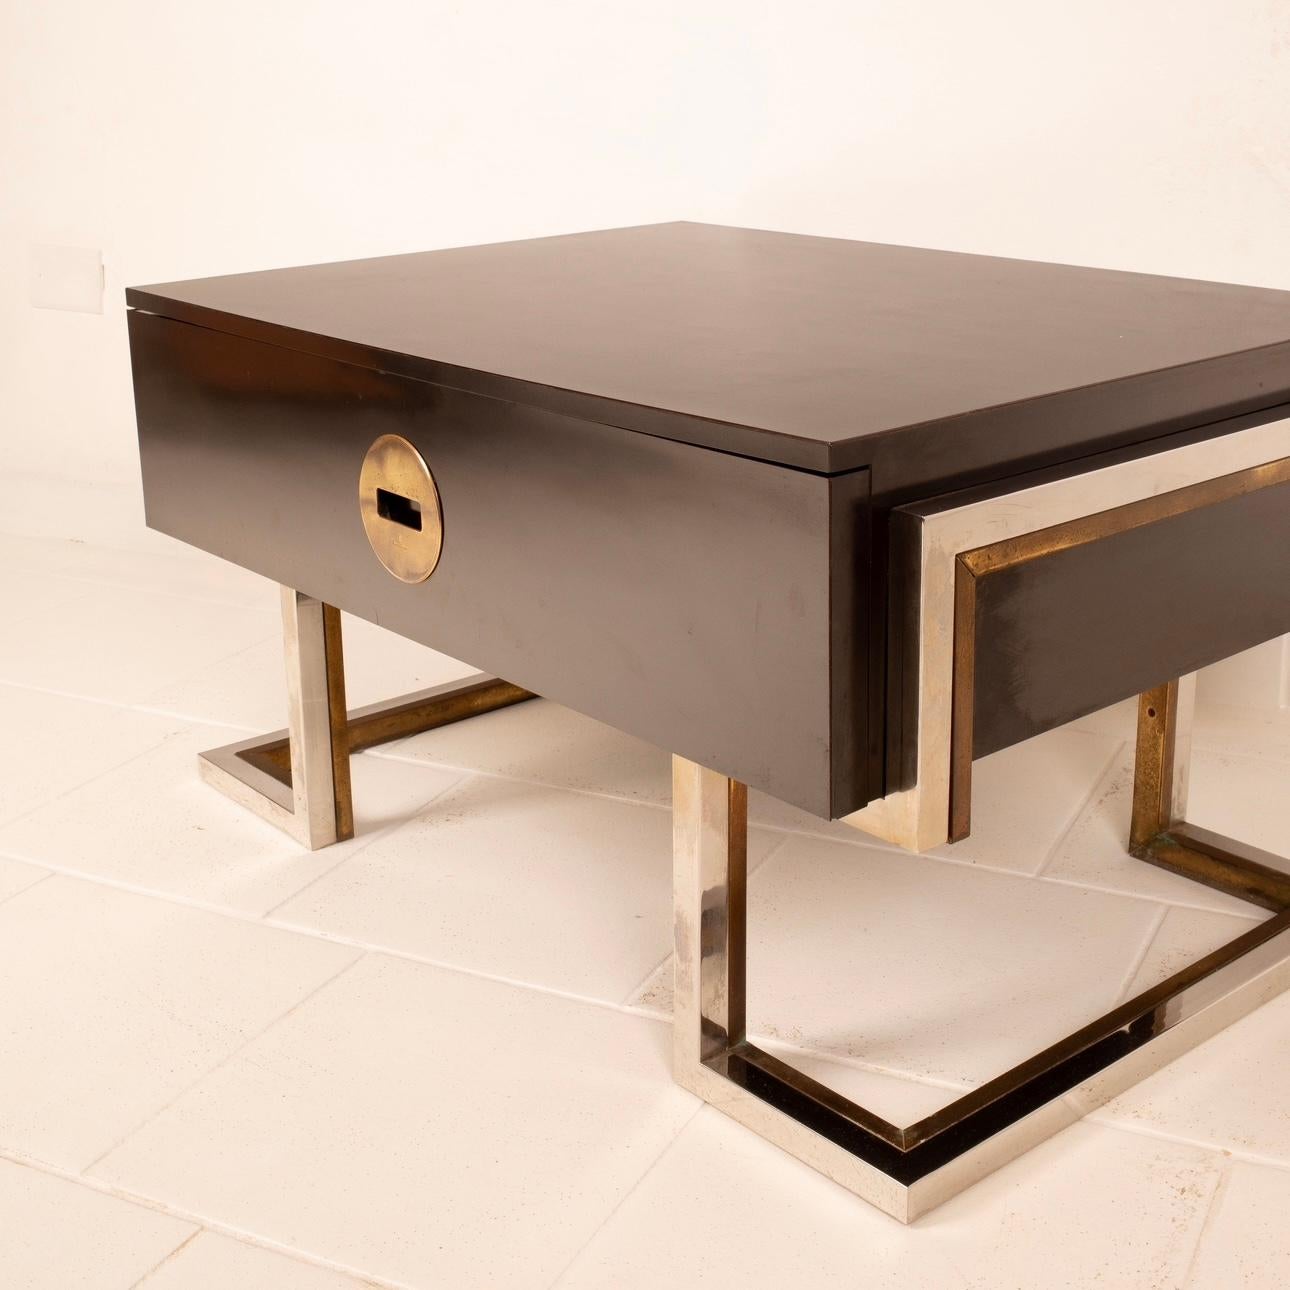 Stunning coffee table or bedside table designed and produced by Romeo Rega in the 1970s.
The coffee table is made of black laminated wood with brass and chrome-plated steel legs in excellent condition.
There is a large drawer com brass handle where